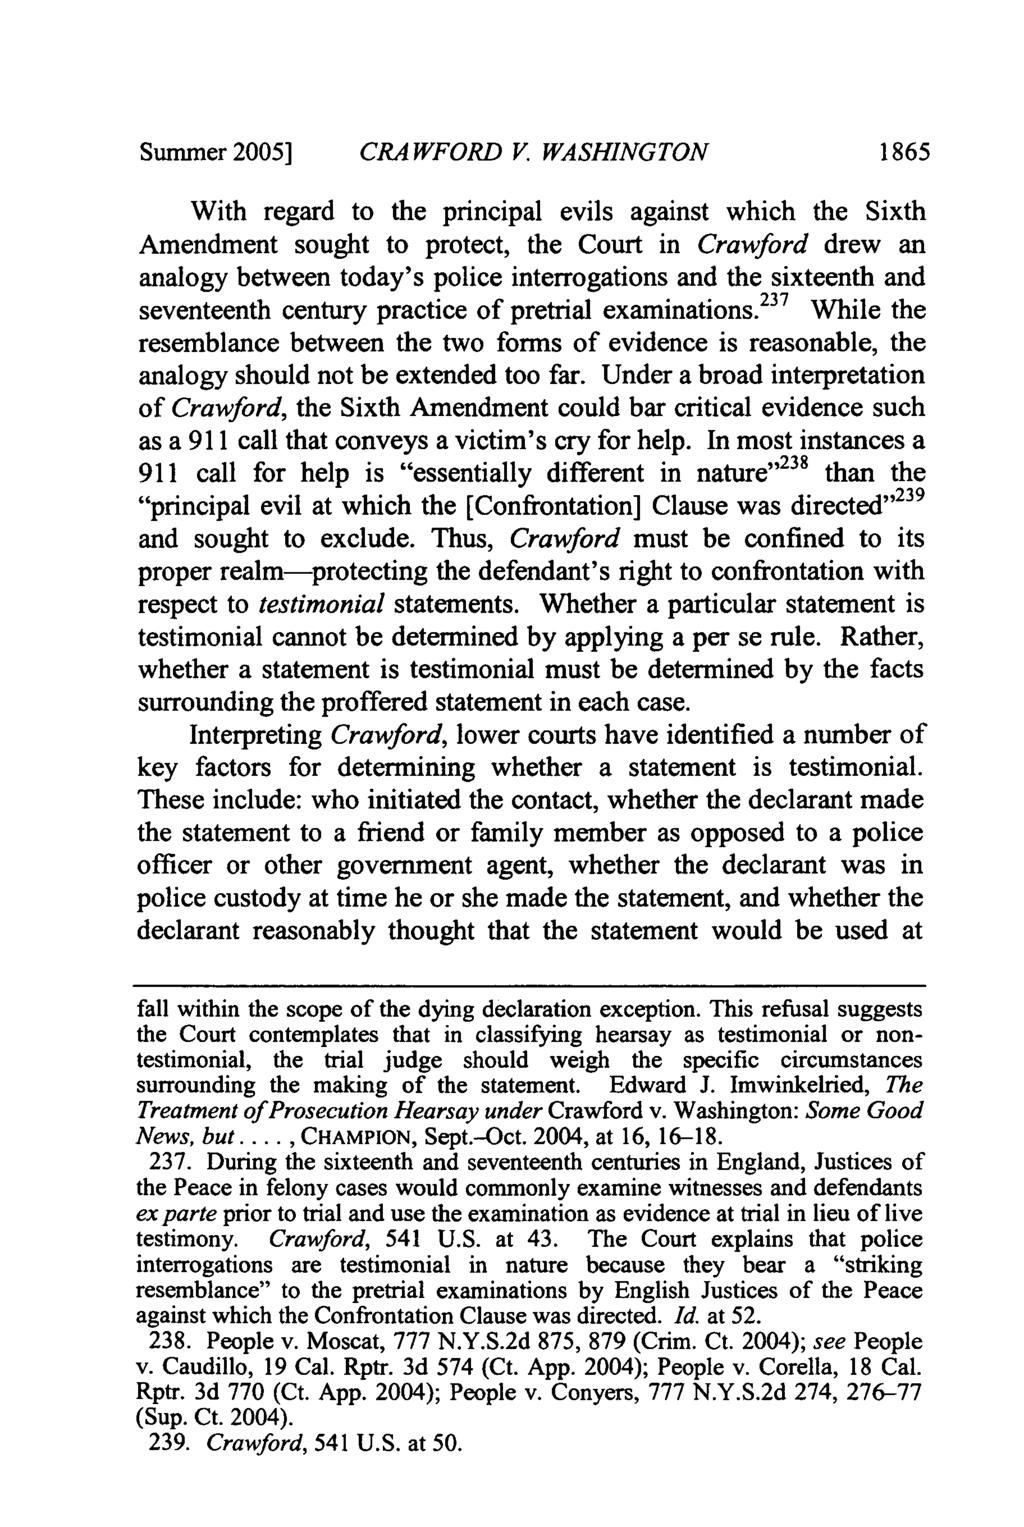 Summer 2005) CRAWFORD V WASHINGTON 1865 With regard to the principal evils against which the Sixth Amendment sought to protect, the Court in Crawford drew an analogy between today's police